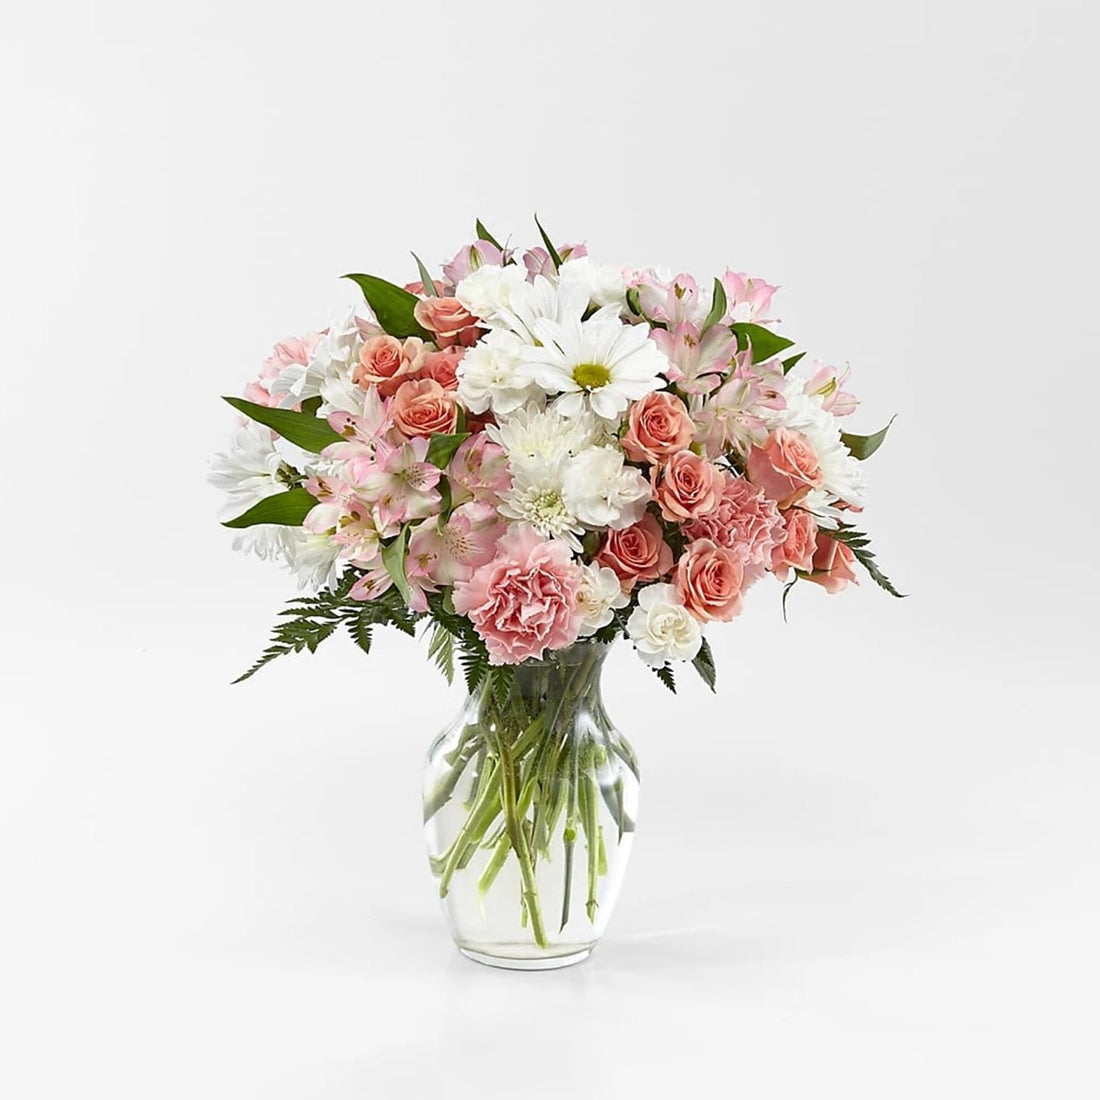 Pink and White Flowers, flowers for garden and home decoration with daisies, mini roses, astromeliads, it is a beautiful gift for anniversary, flower gift for birthday, flowers for all occasions and decoration, Fresh Flowers Orlando.